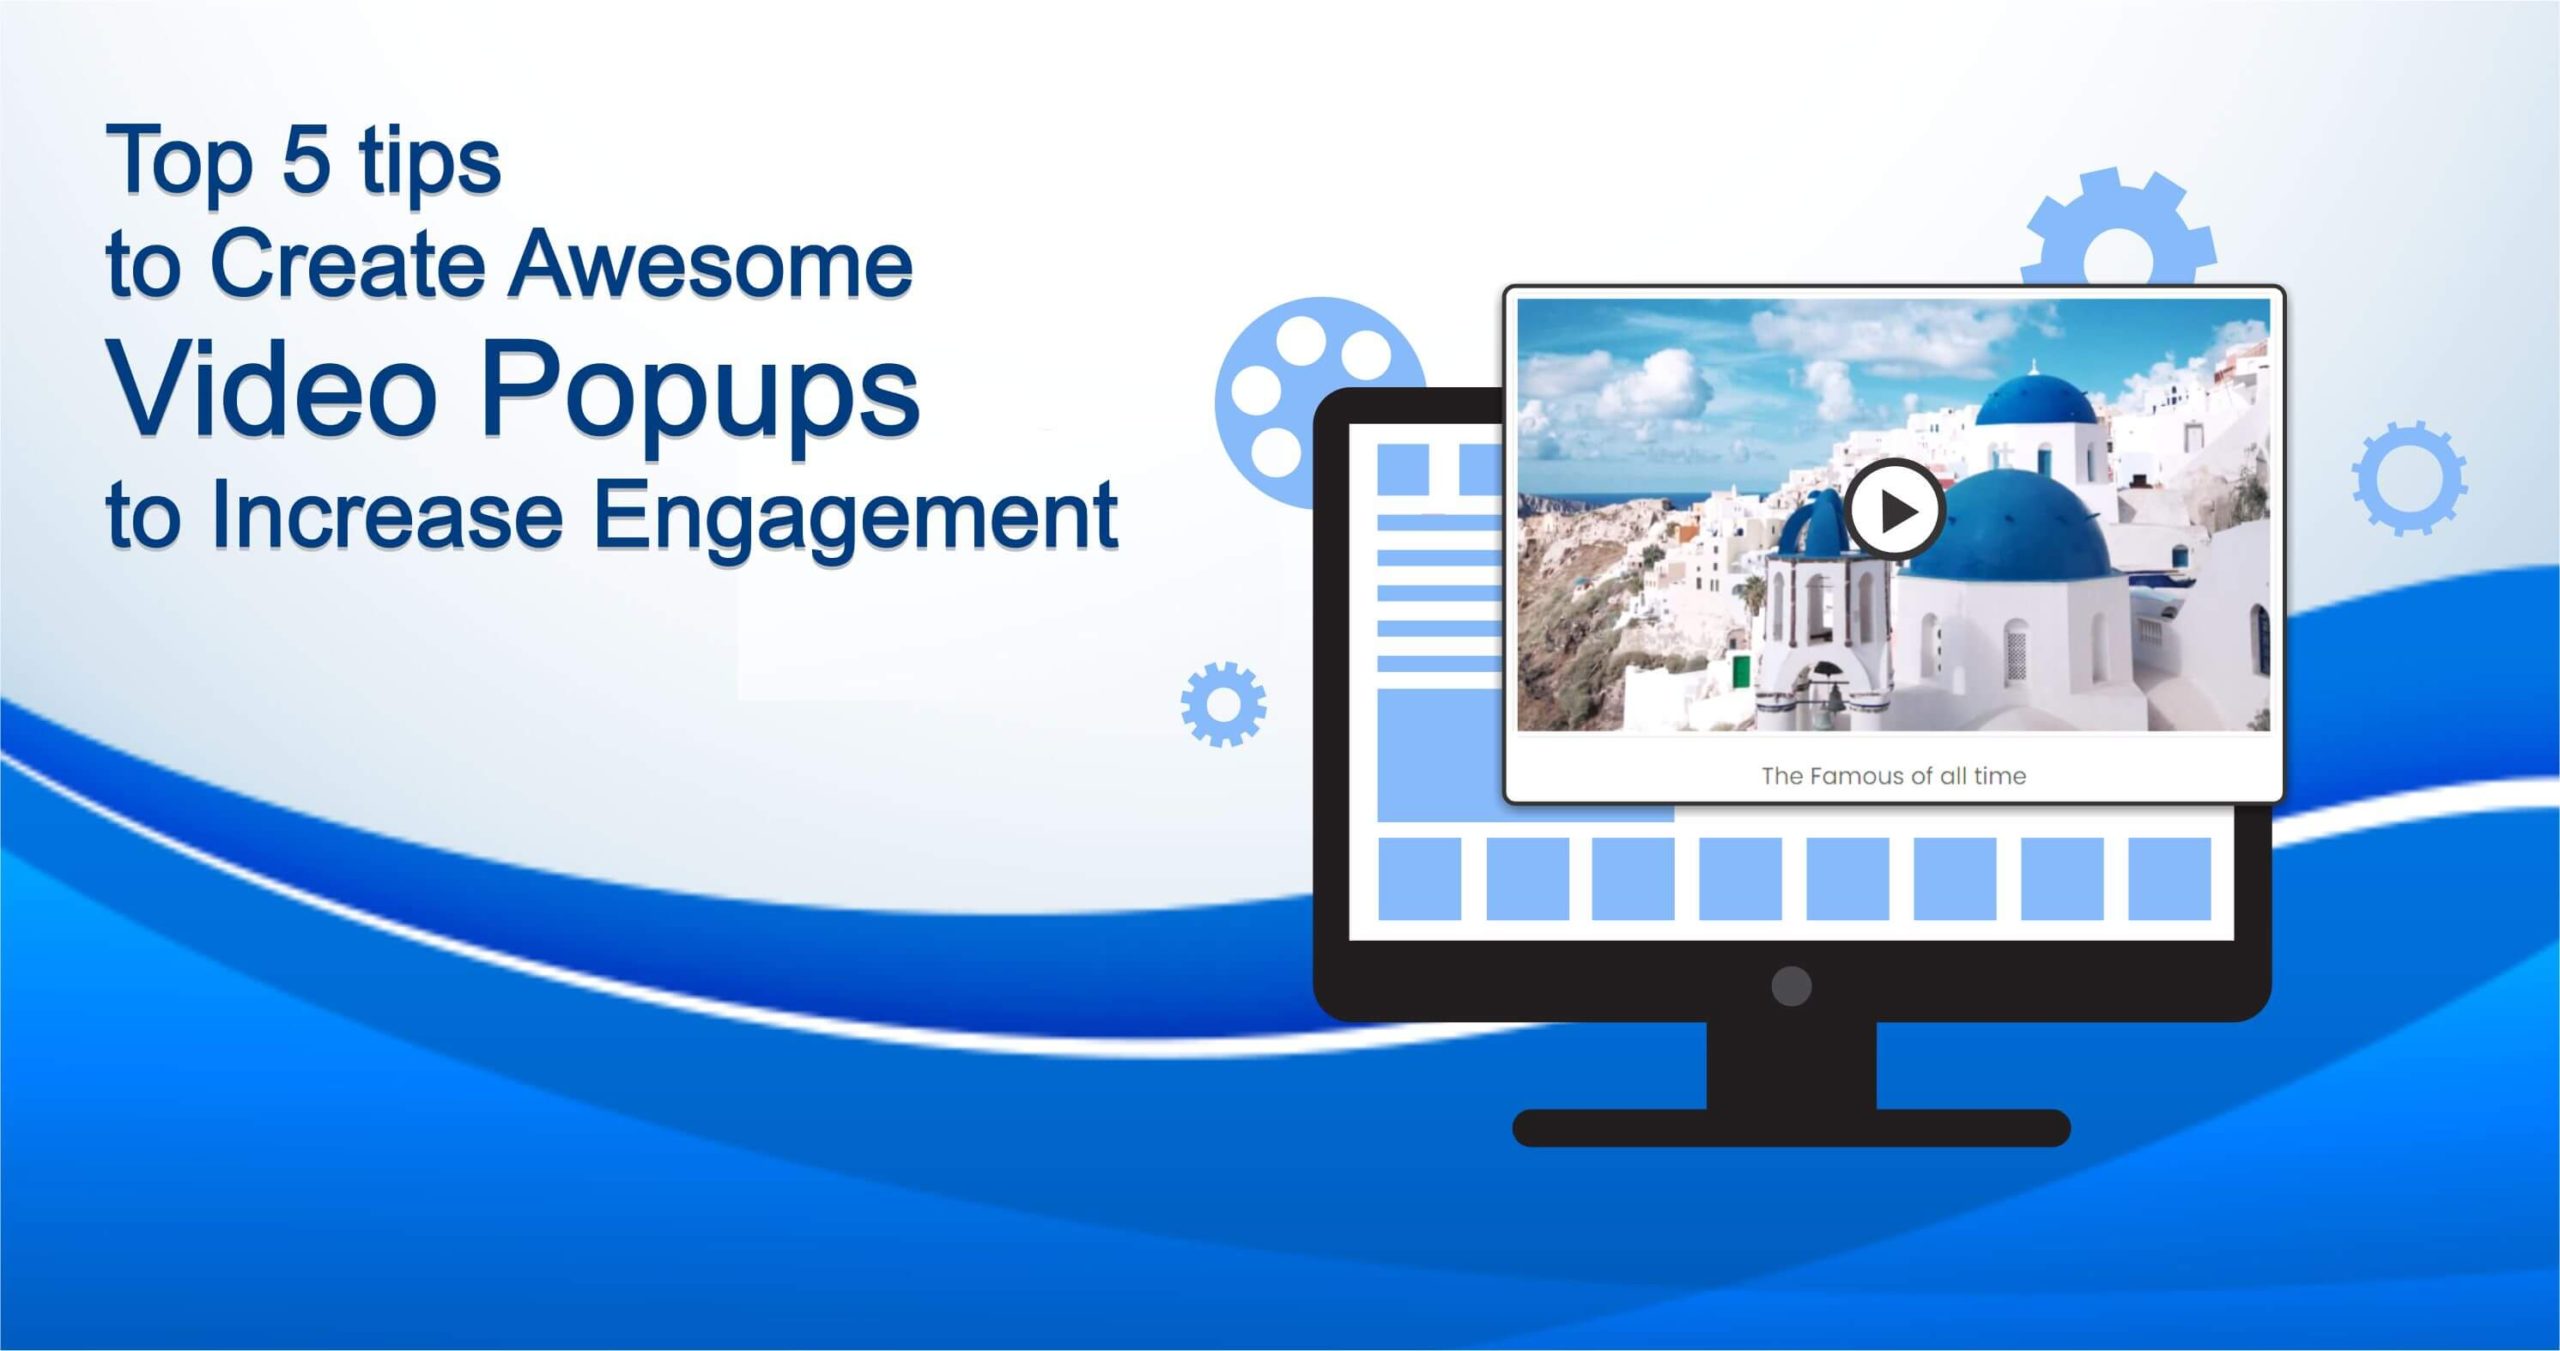 Top 5 tips to Create Awesome Video Popups to Increase Engagement